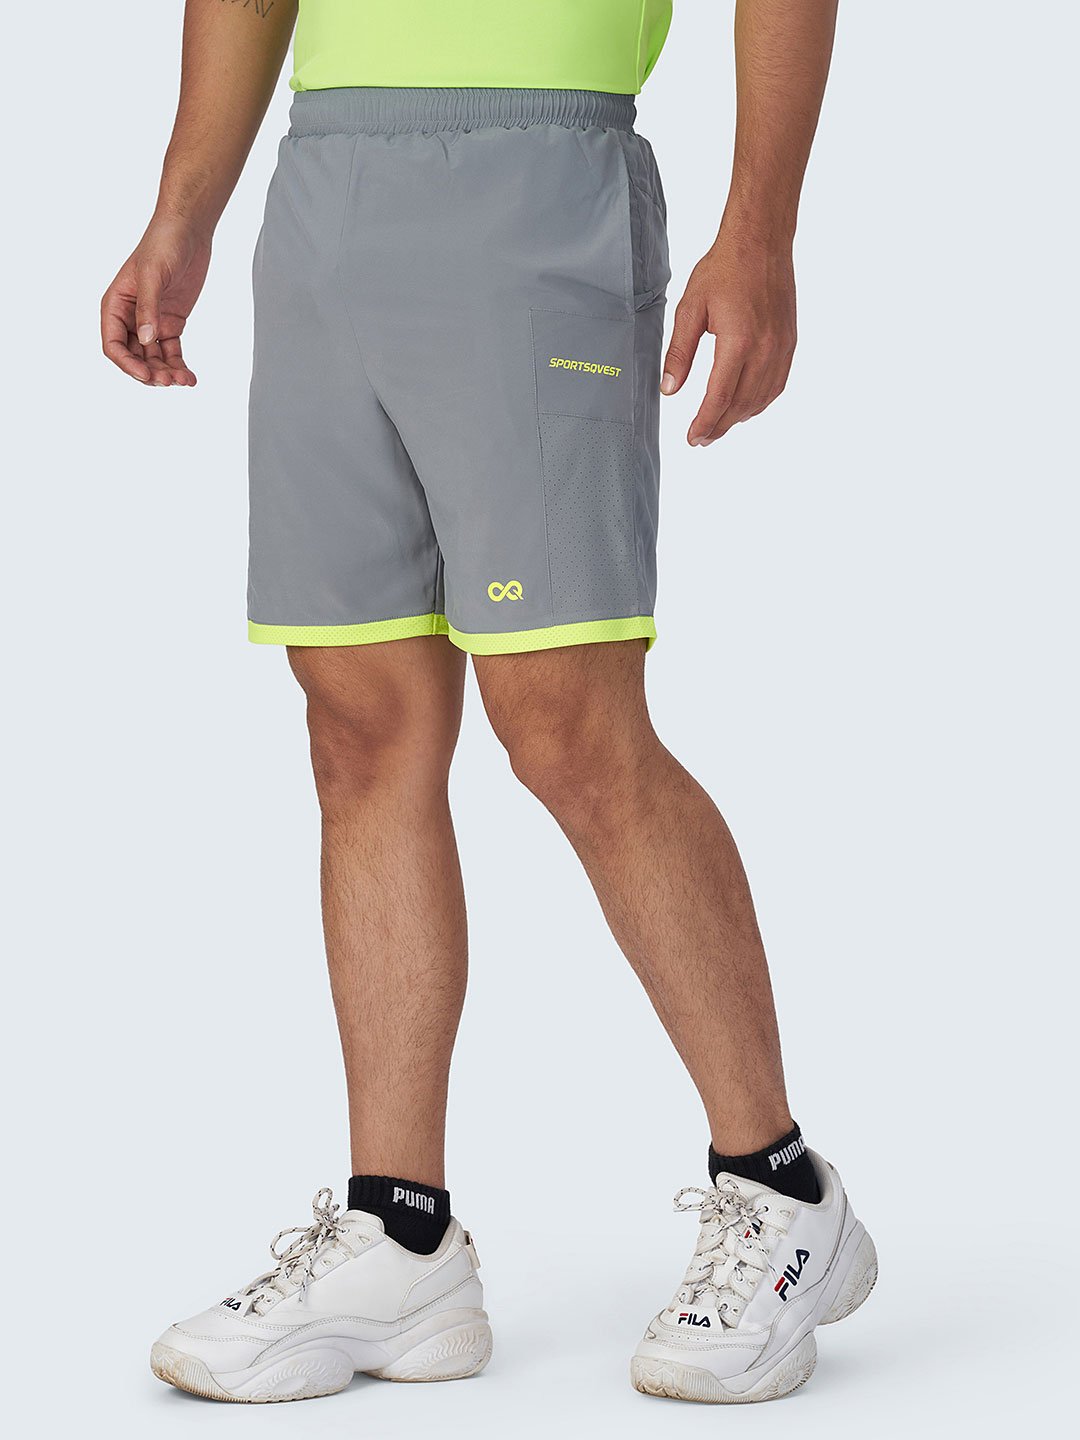 Men's Active Sports Shorts with Neon Piping